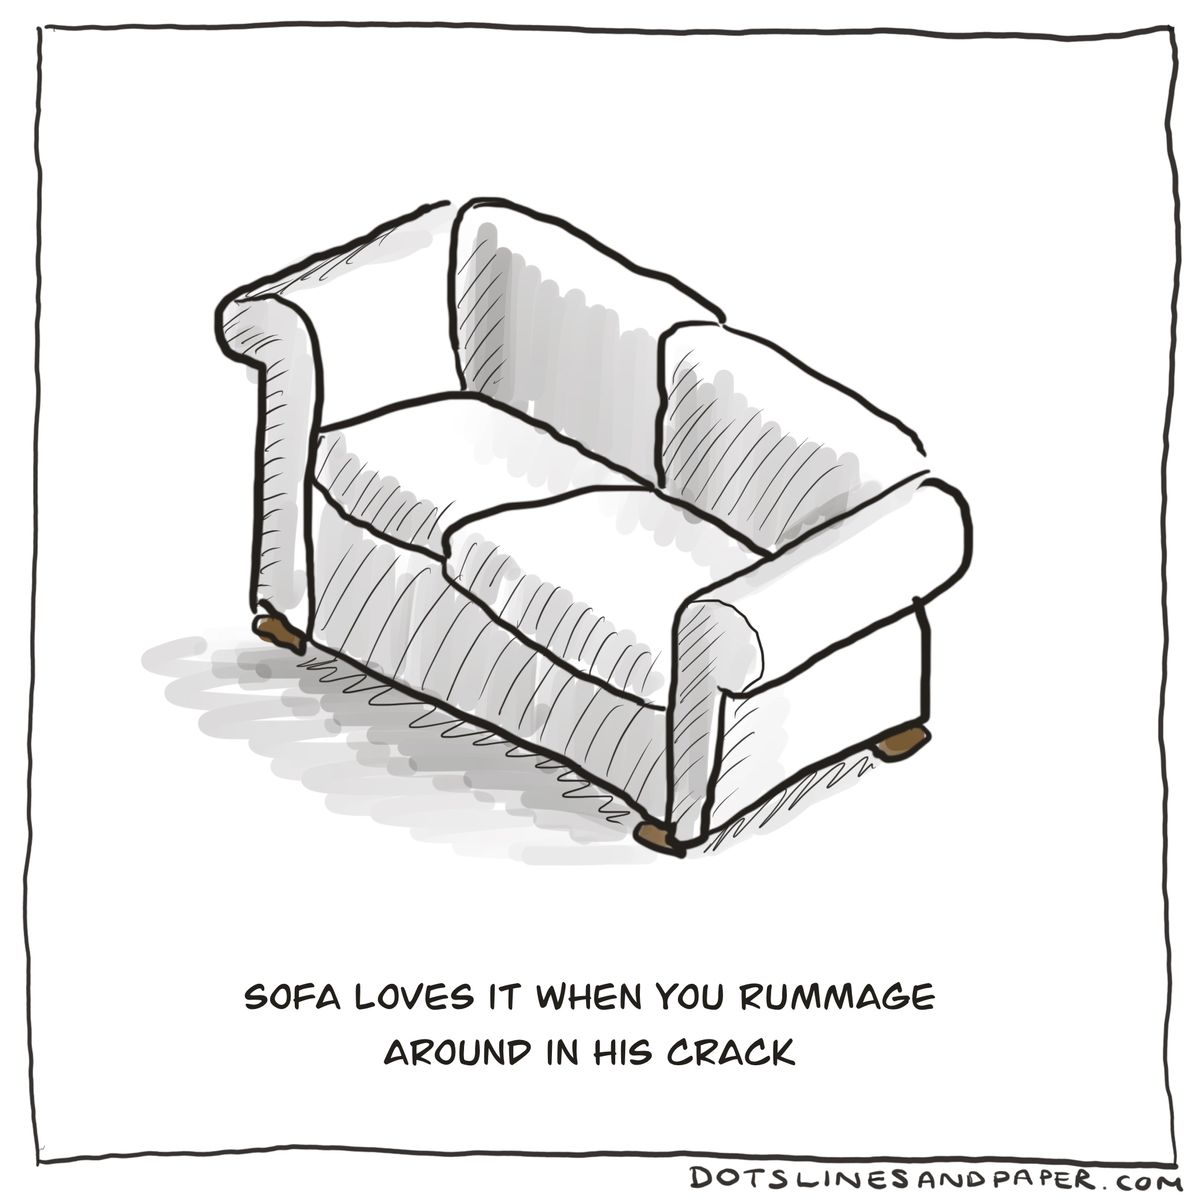 Sofa loves it when you rummage around in his crack